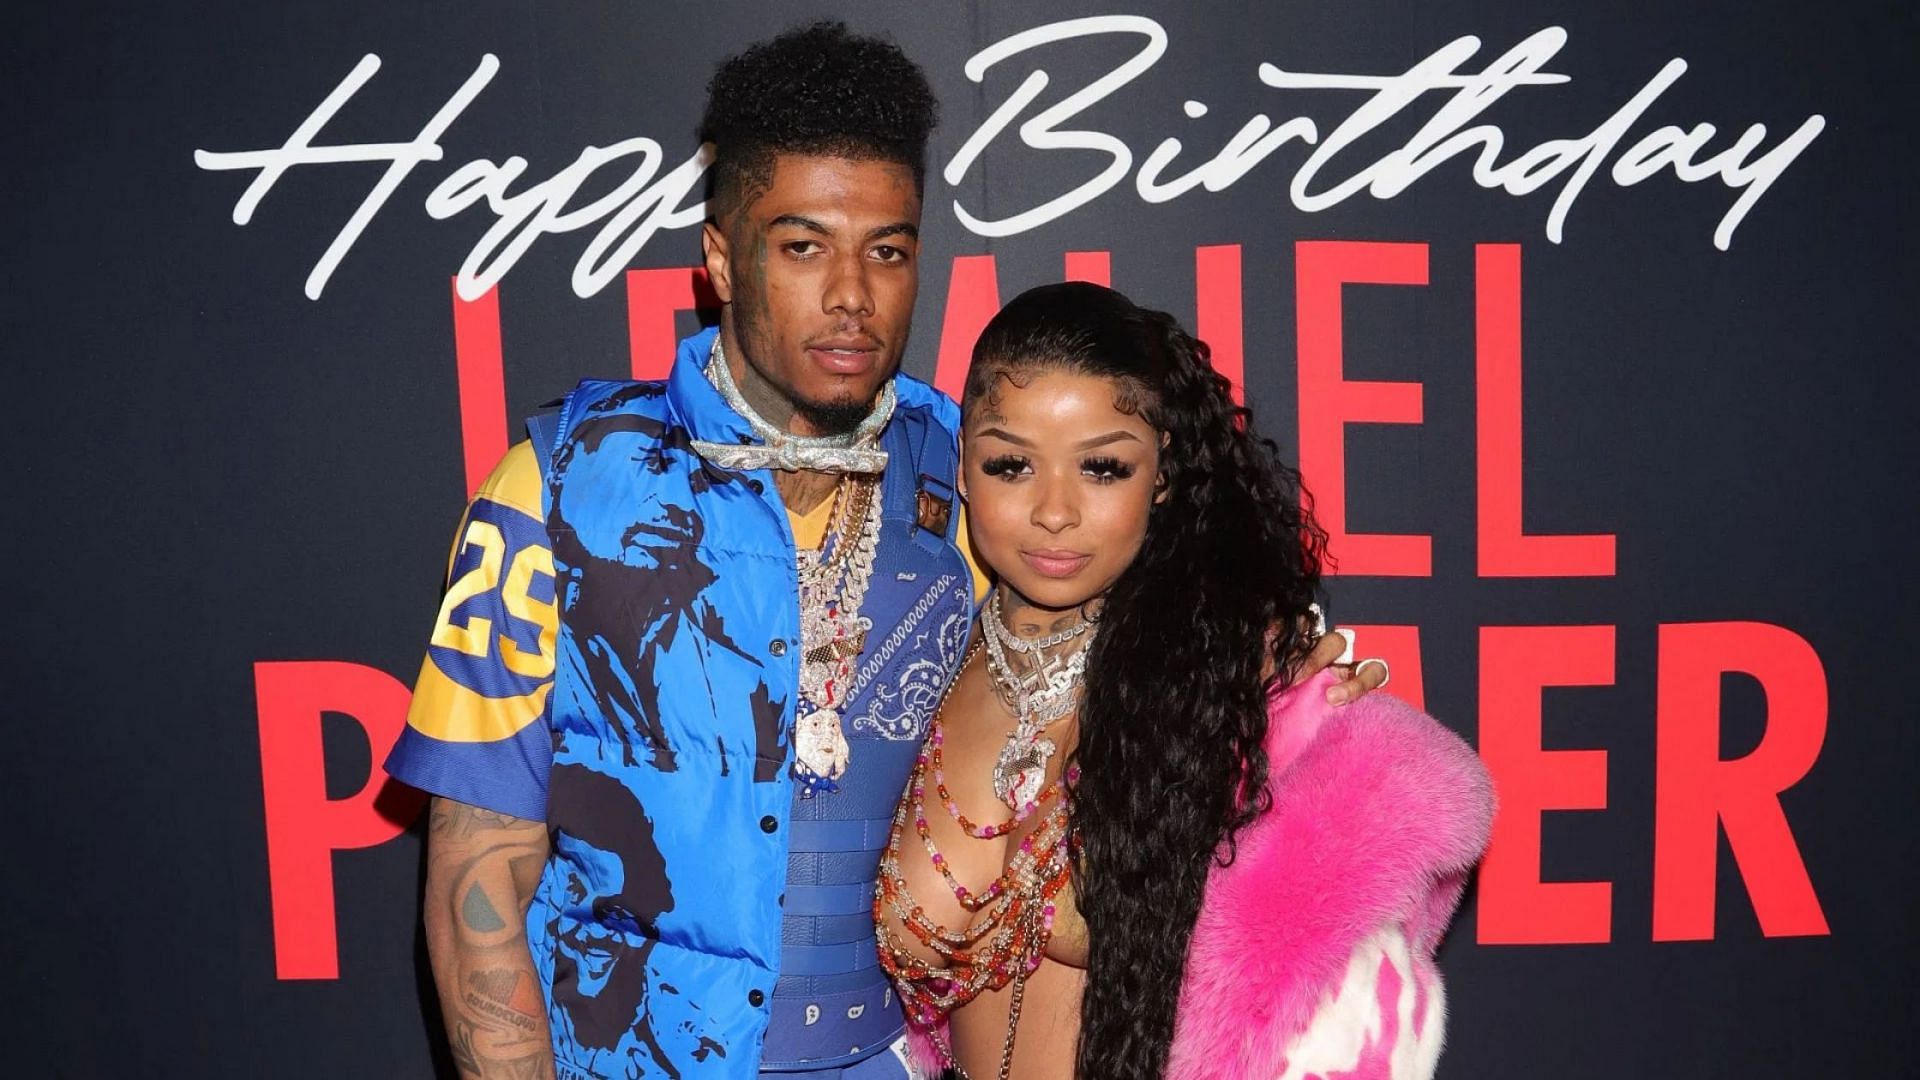 Chrisean Rock claps back at Blueface after he allegedly berated her (Image via Getty)